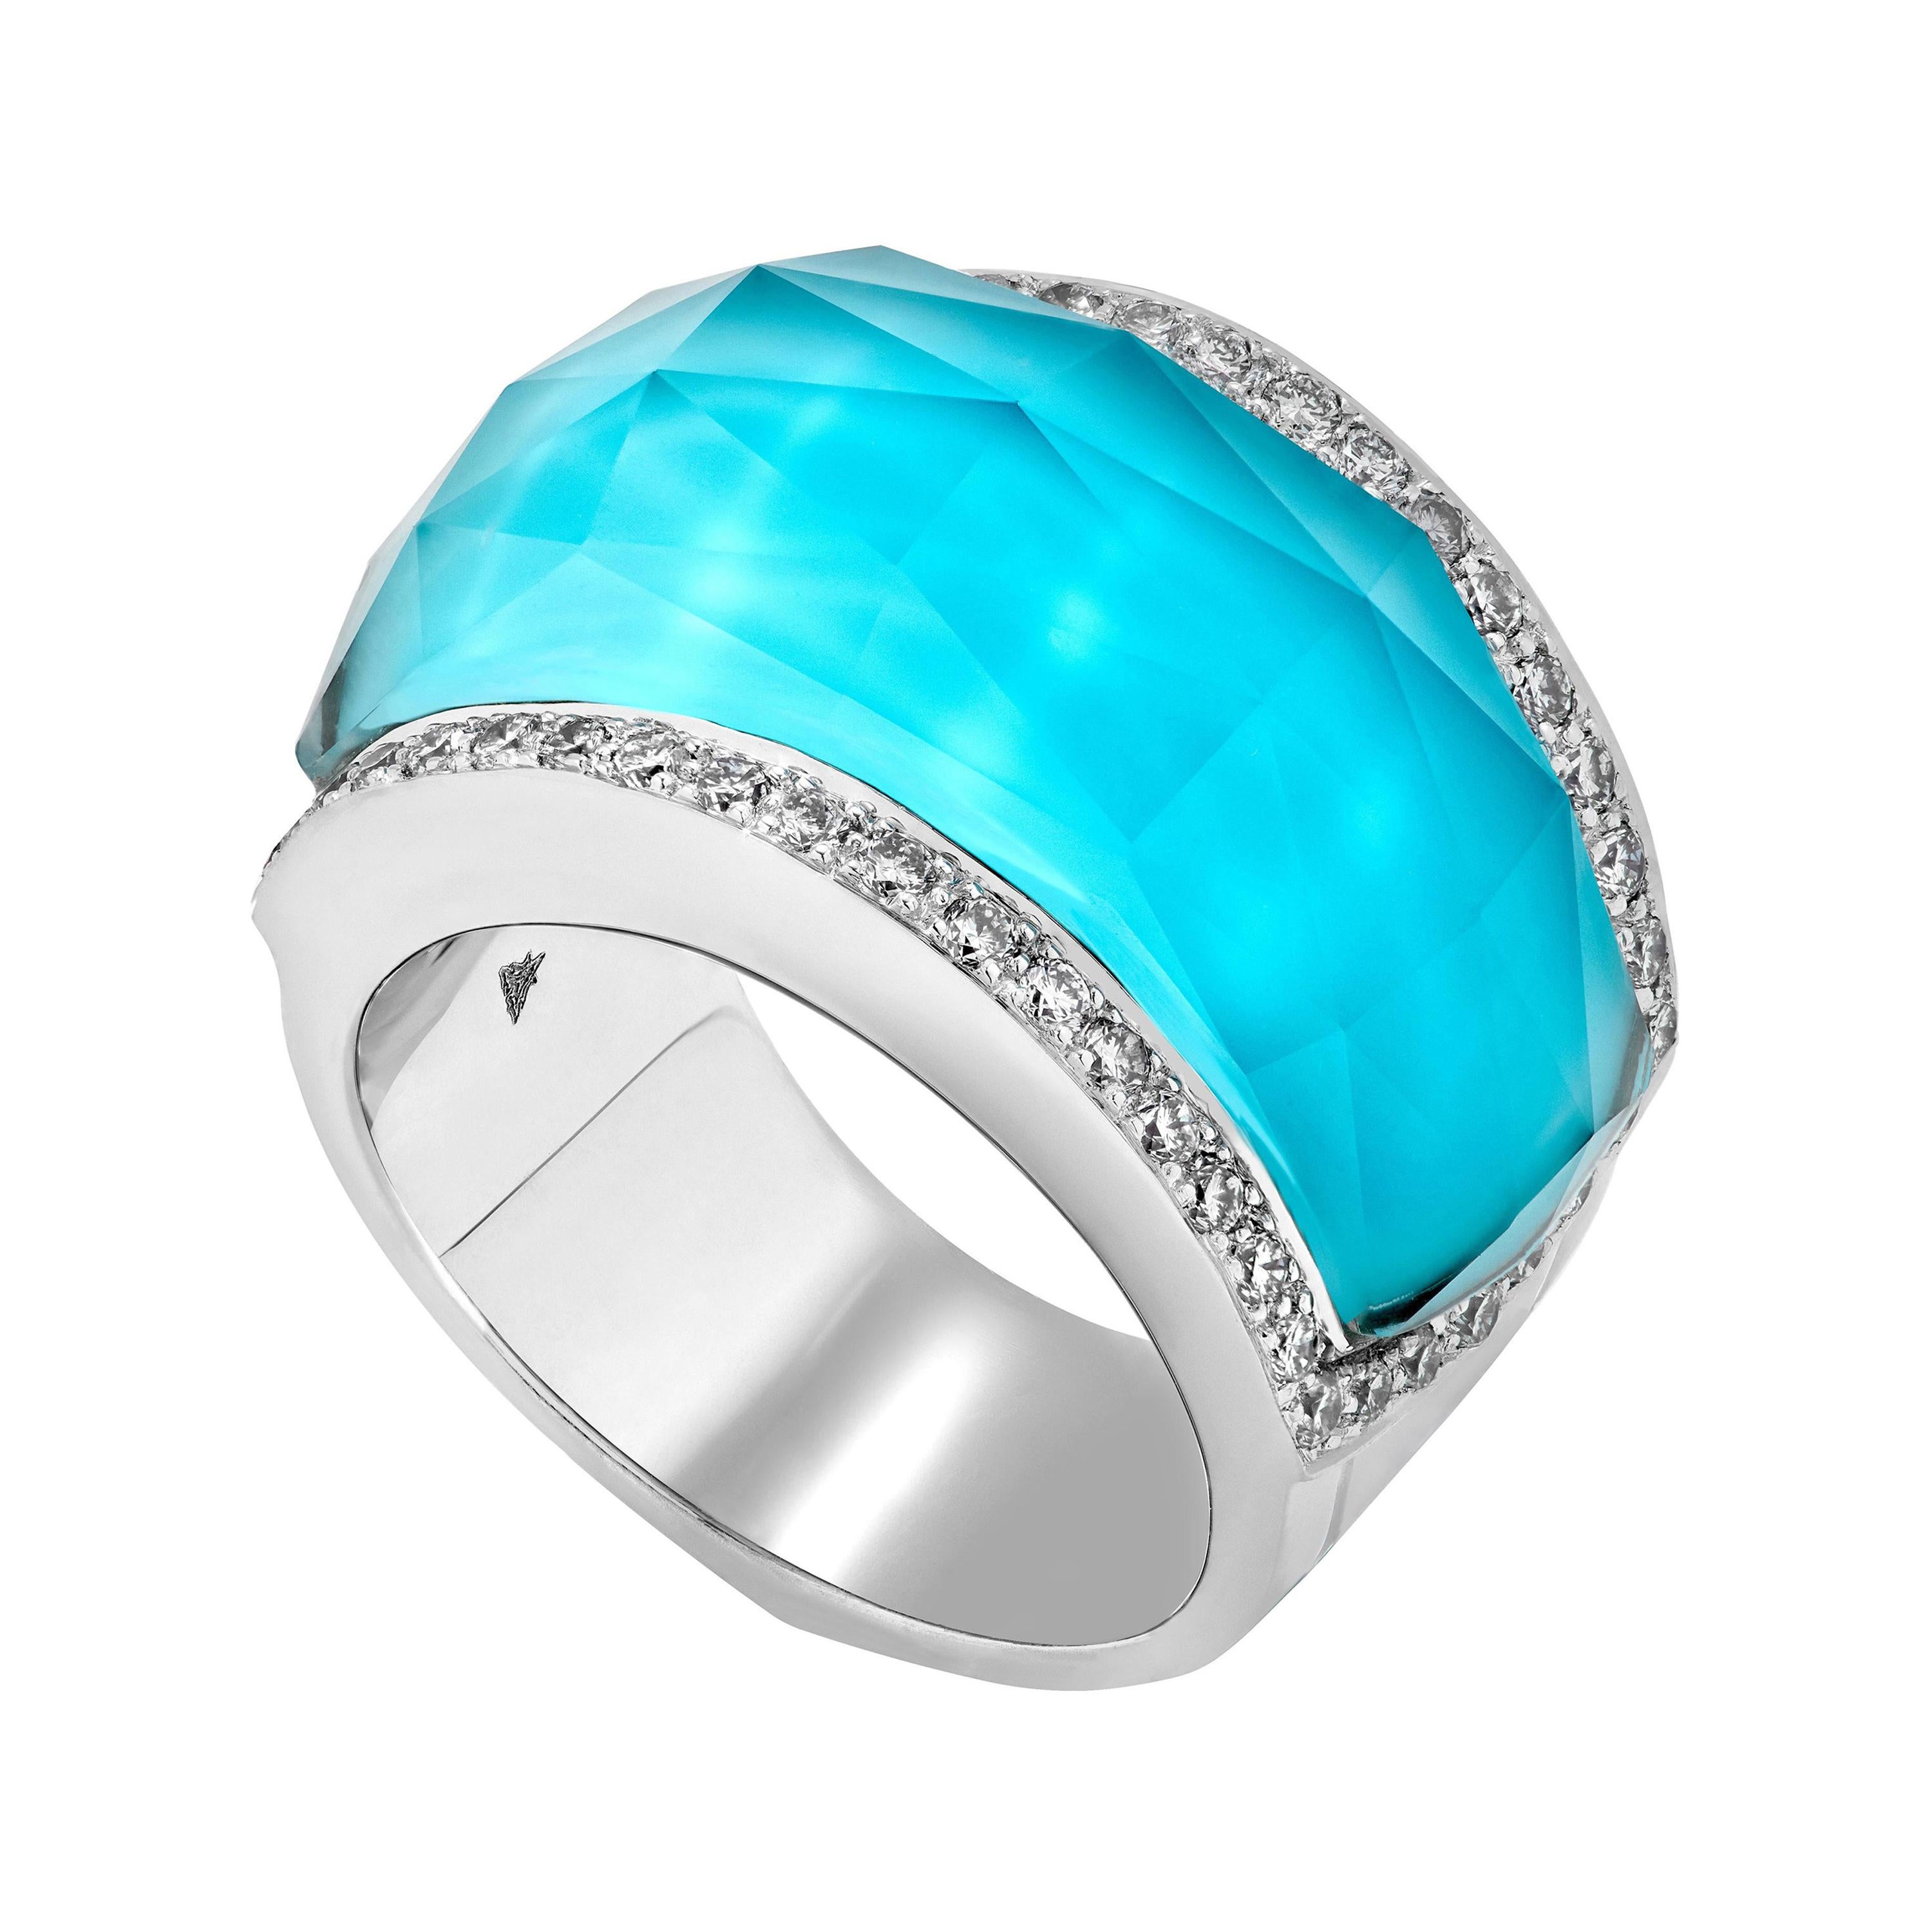 For Sale:  Stephen Webster Turquoise Crystal Haze and White Diamond Pavé Cocktail Ring